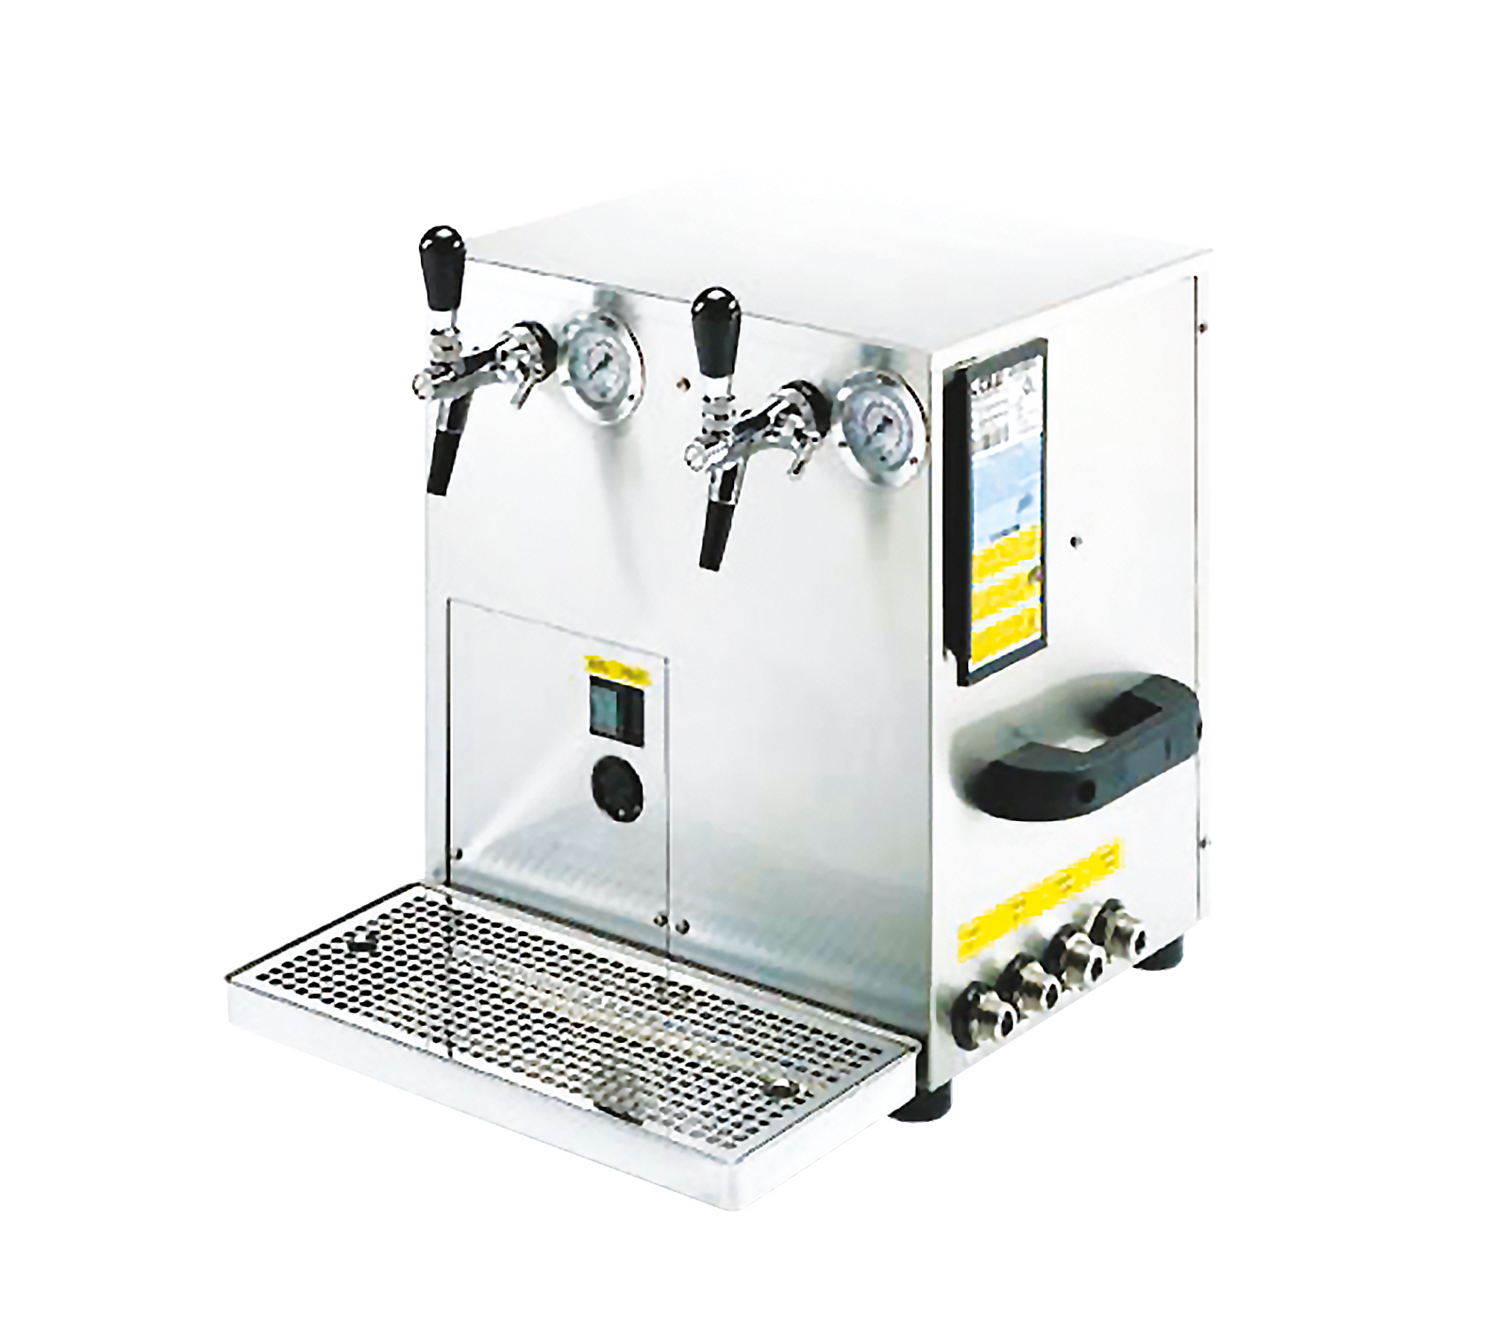 CELLI Cell Dry 115 - The draught beer machine